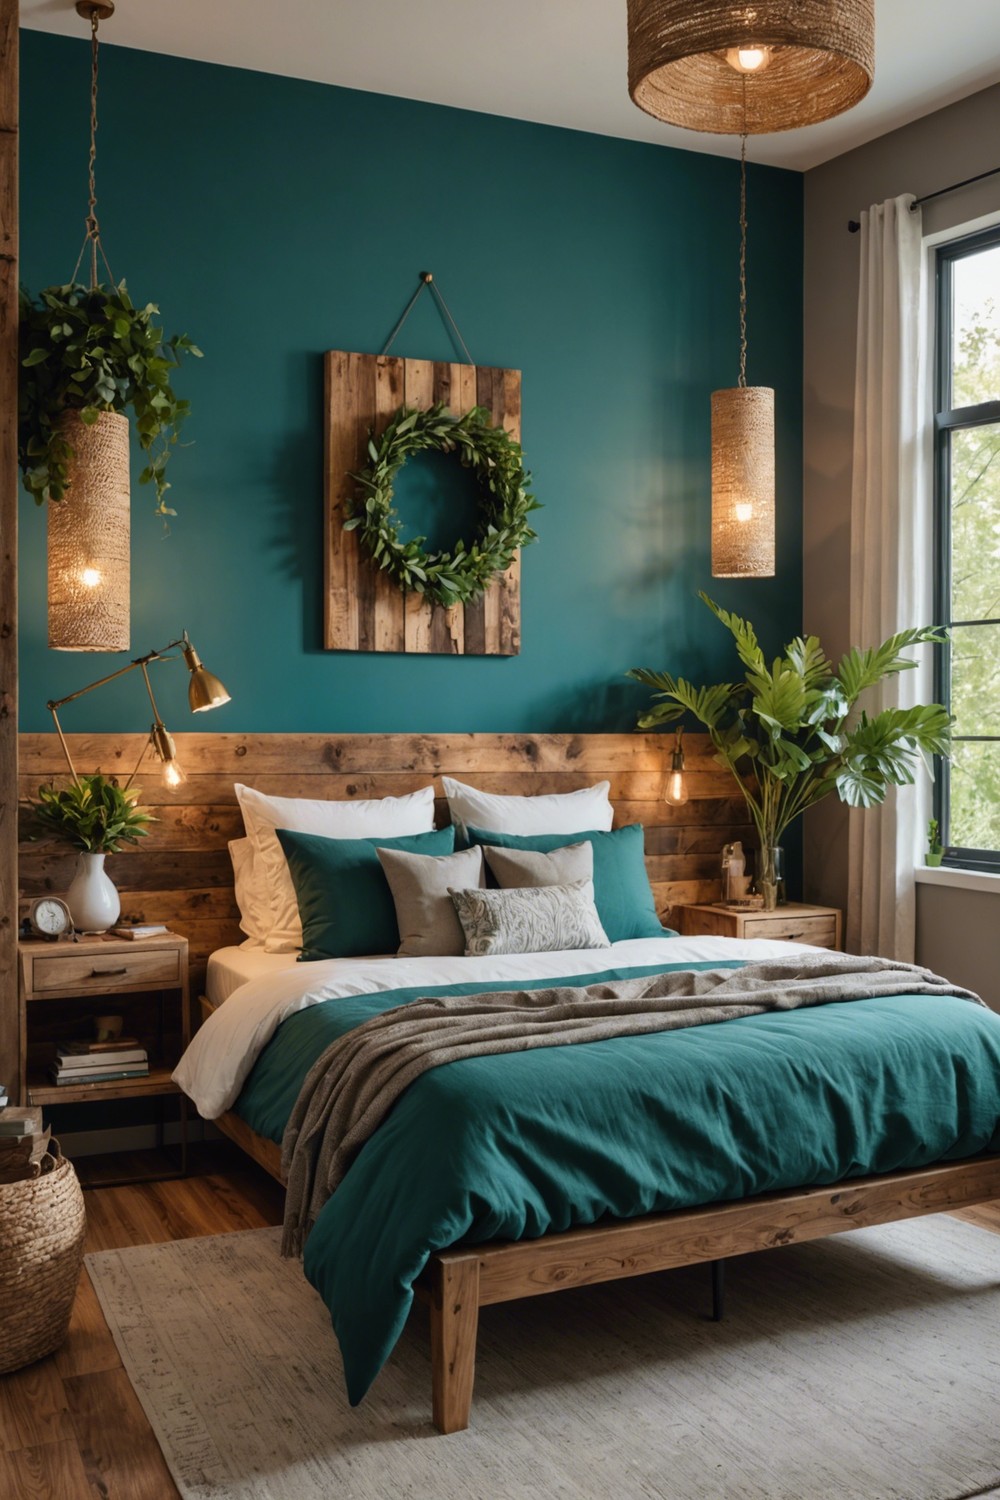 Rustic Charm: Teal with Reclaimed Wood